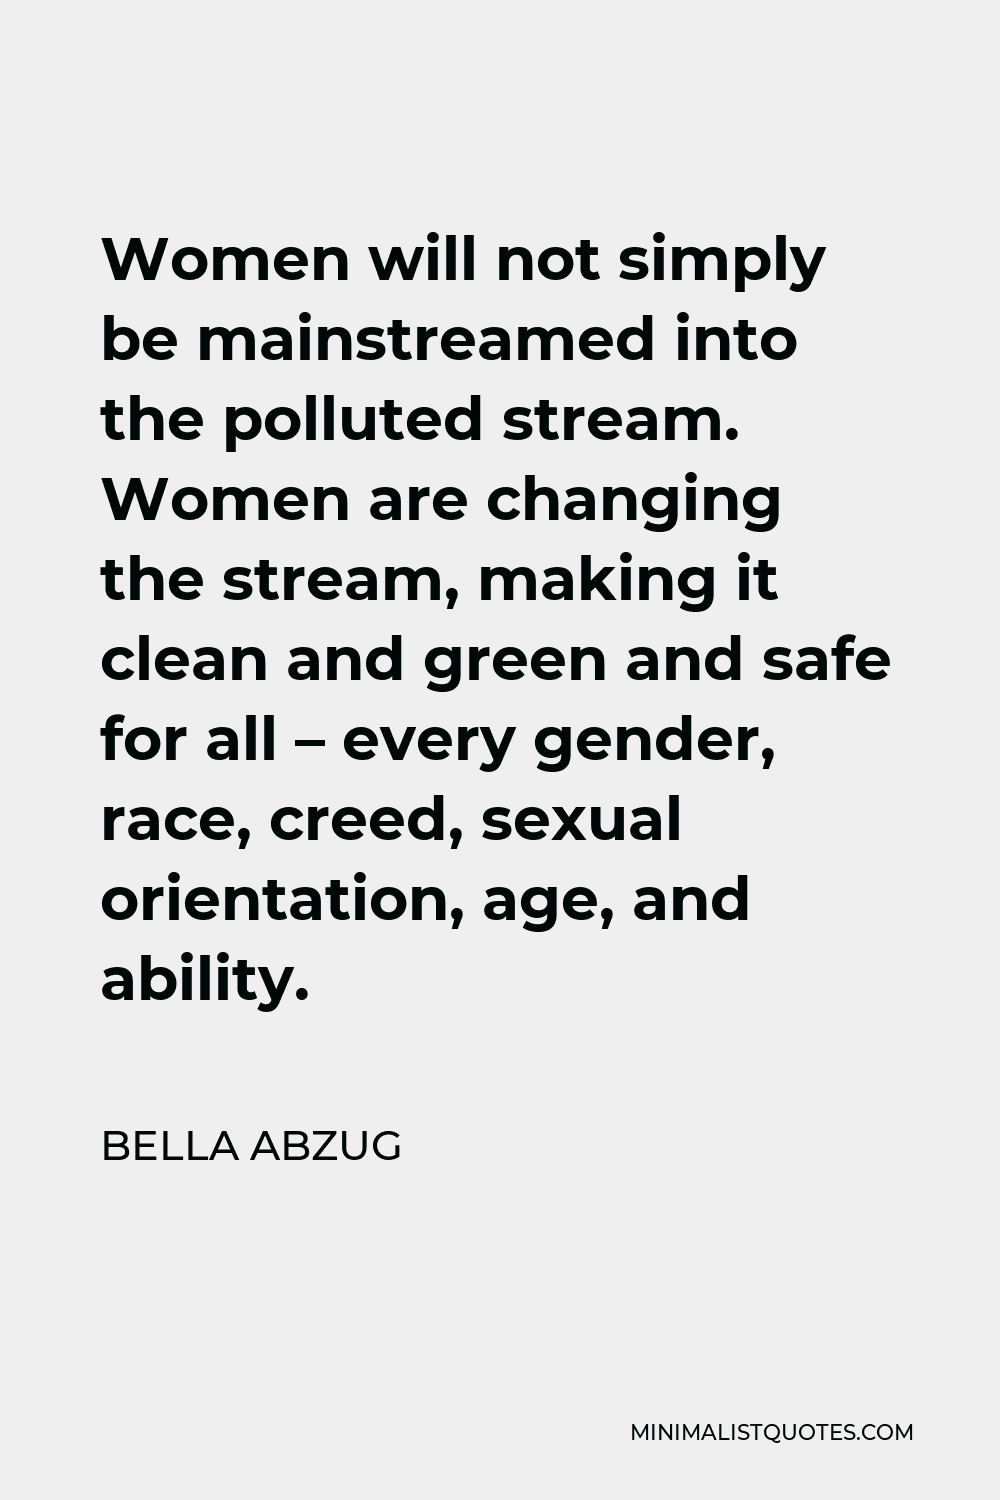 Bella Abzug Quote - Women will not simply be mainstreamed into the polluted stream. Women are changing the stream, making it clean and green and safe for all – every gender, race, creed, sexual orientation, age, and ability.